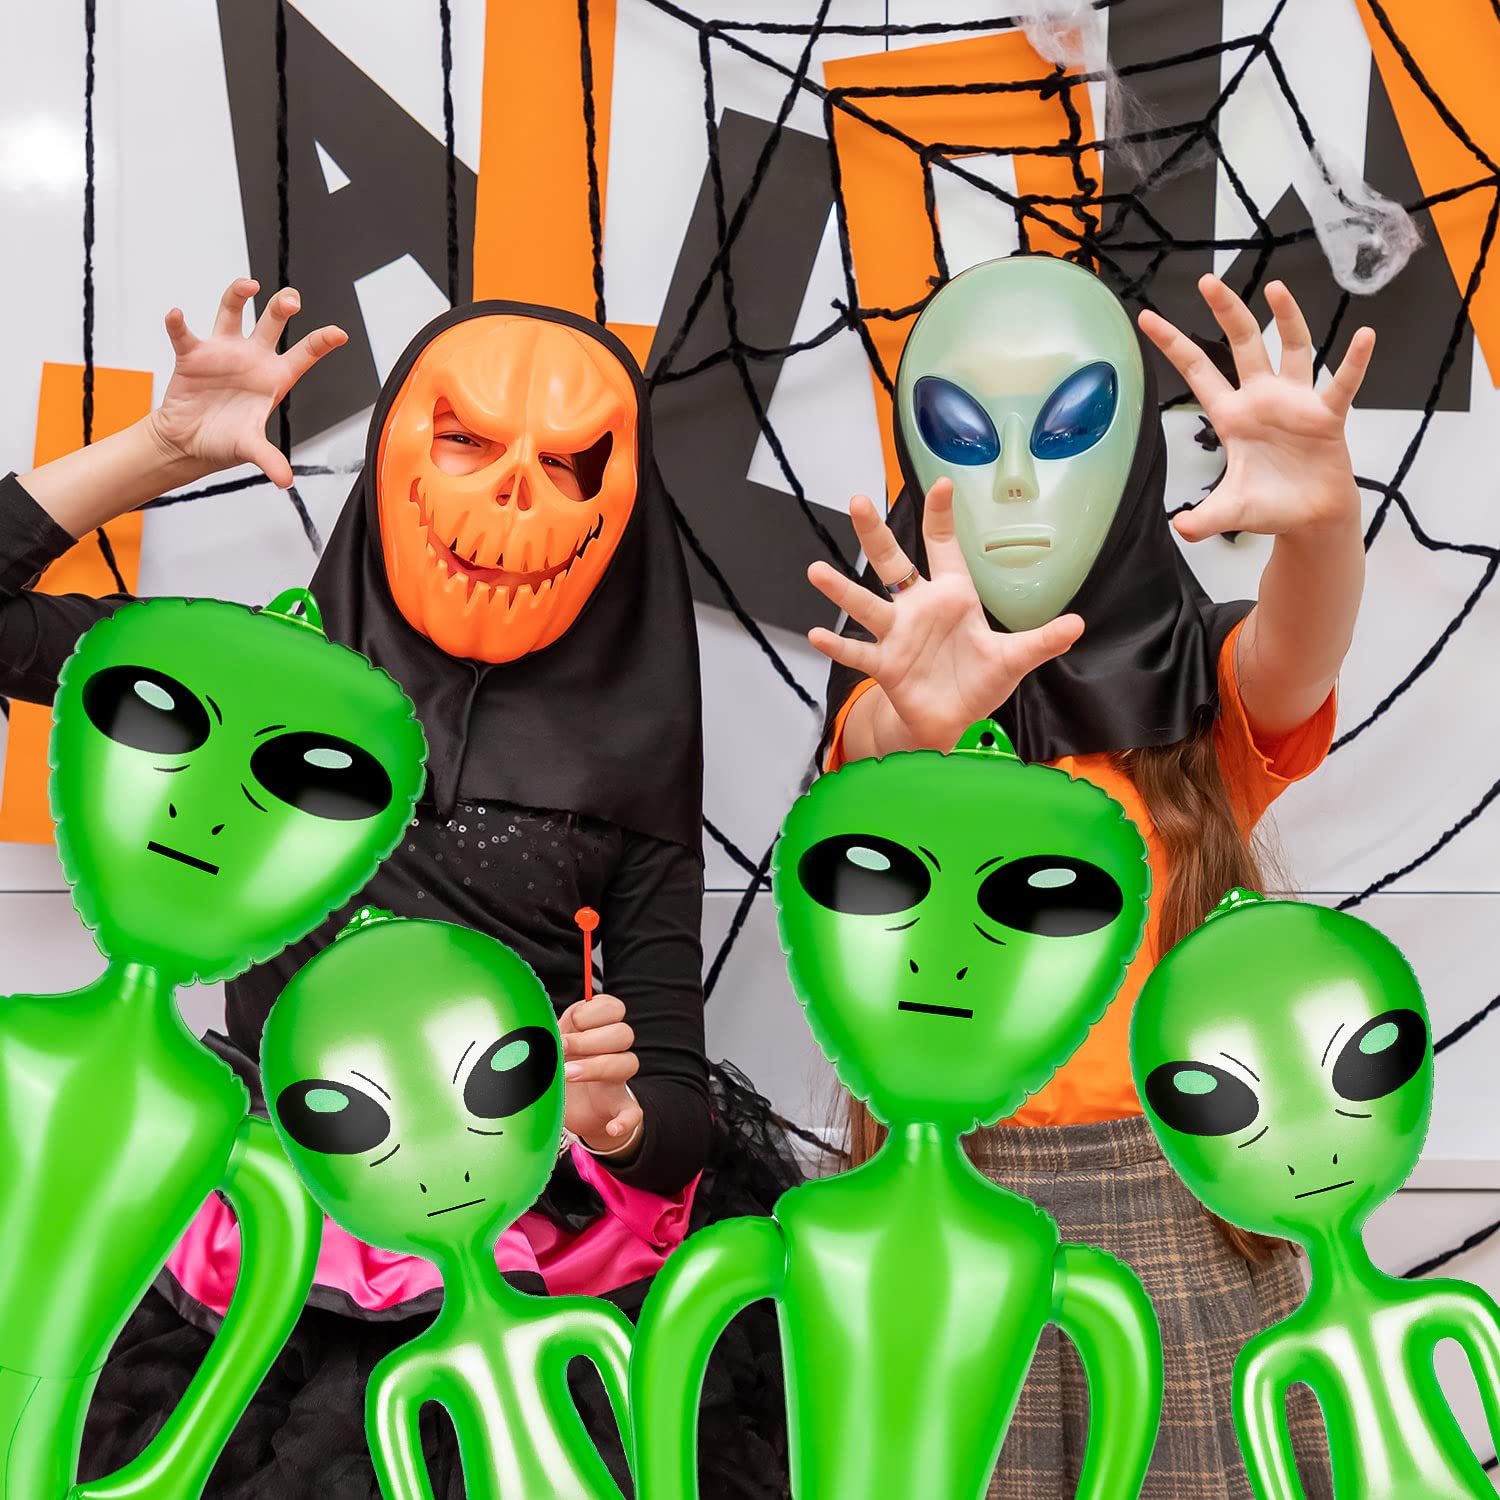 6pcs Alien Inflatable Balloons, 33 Inch Inflatables Alien and 21 Inch Alien Inflates Balloon for Alien Party, Halloween, Christmas, Birthday Decoration (Green)